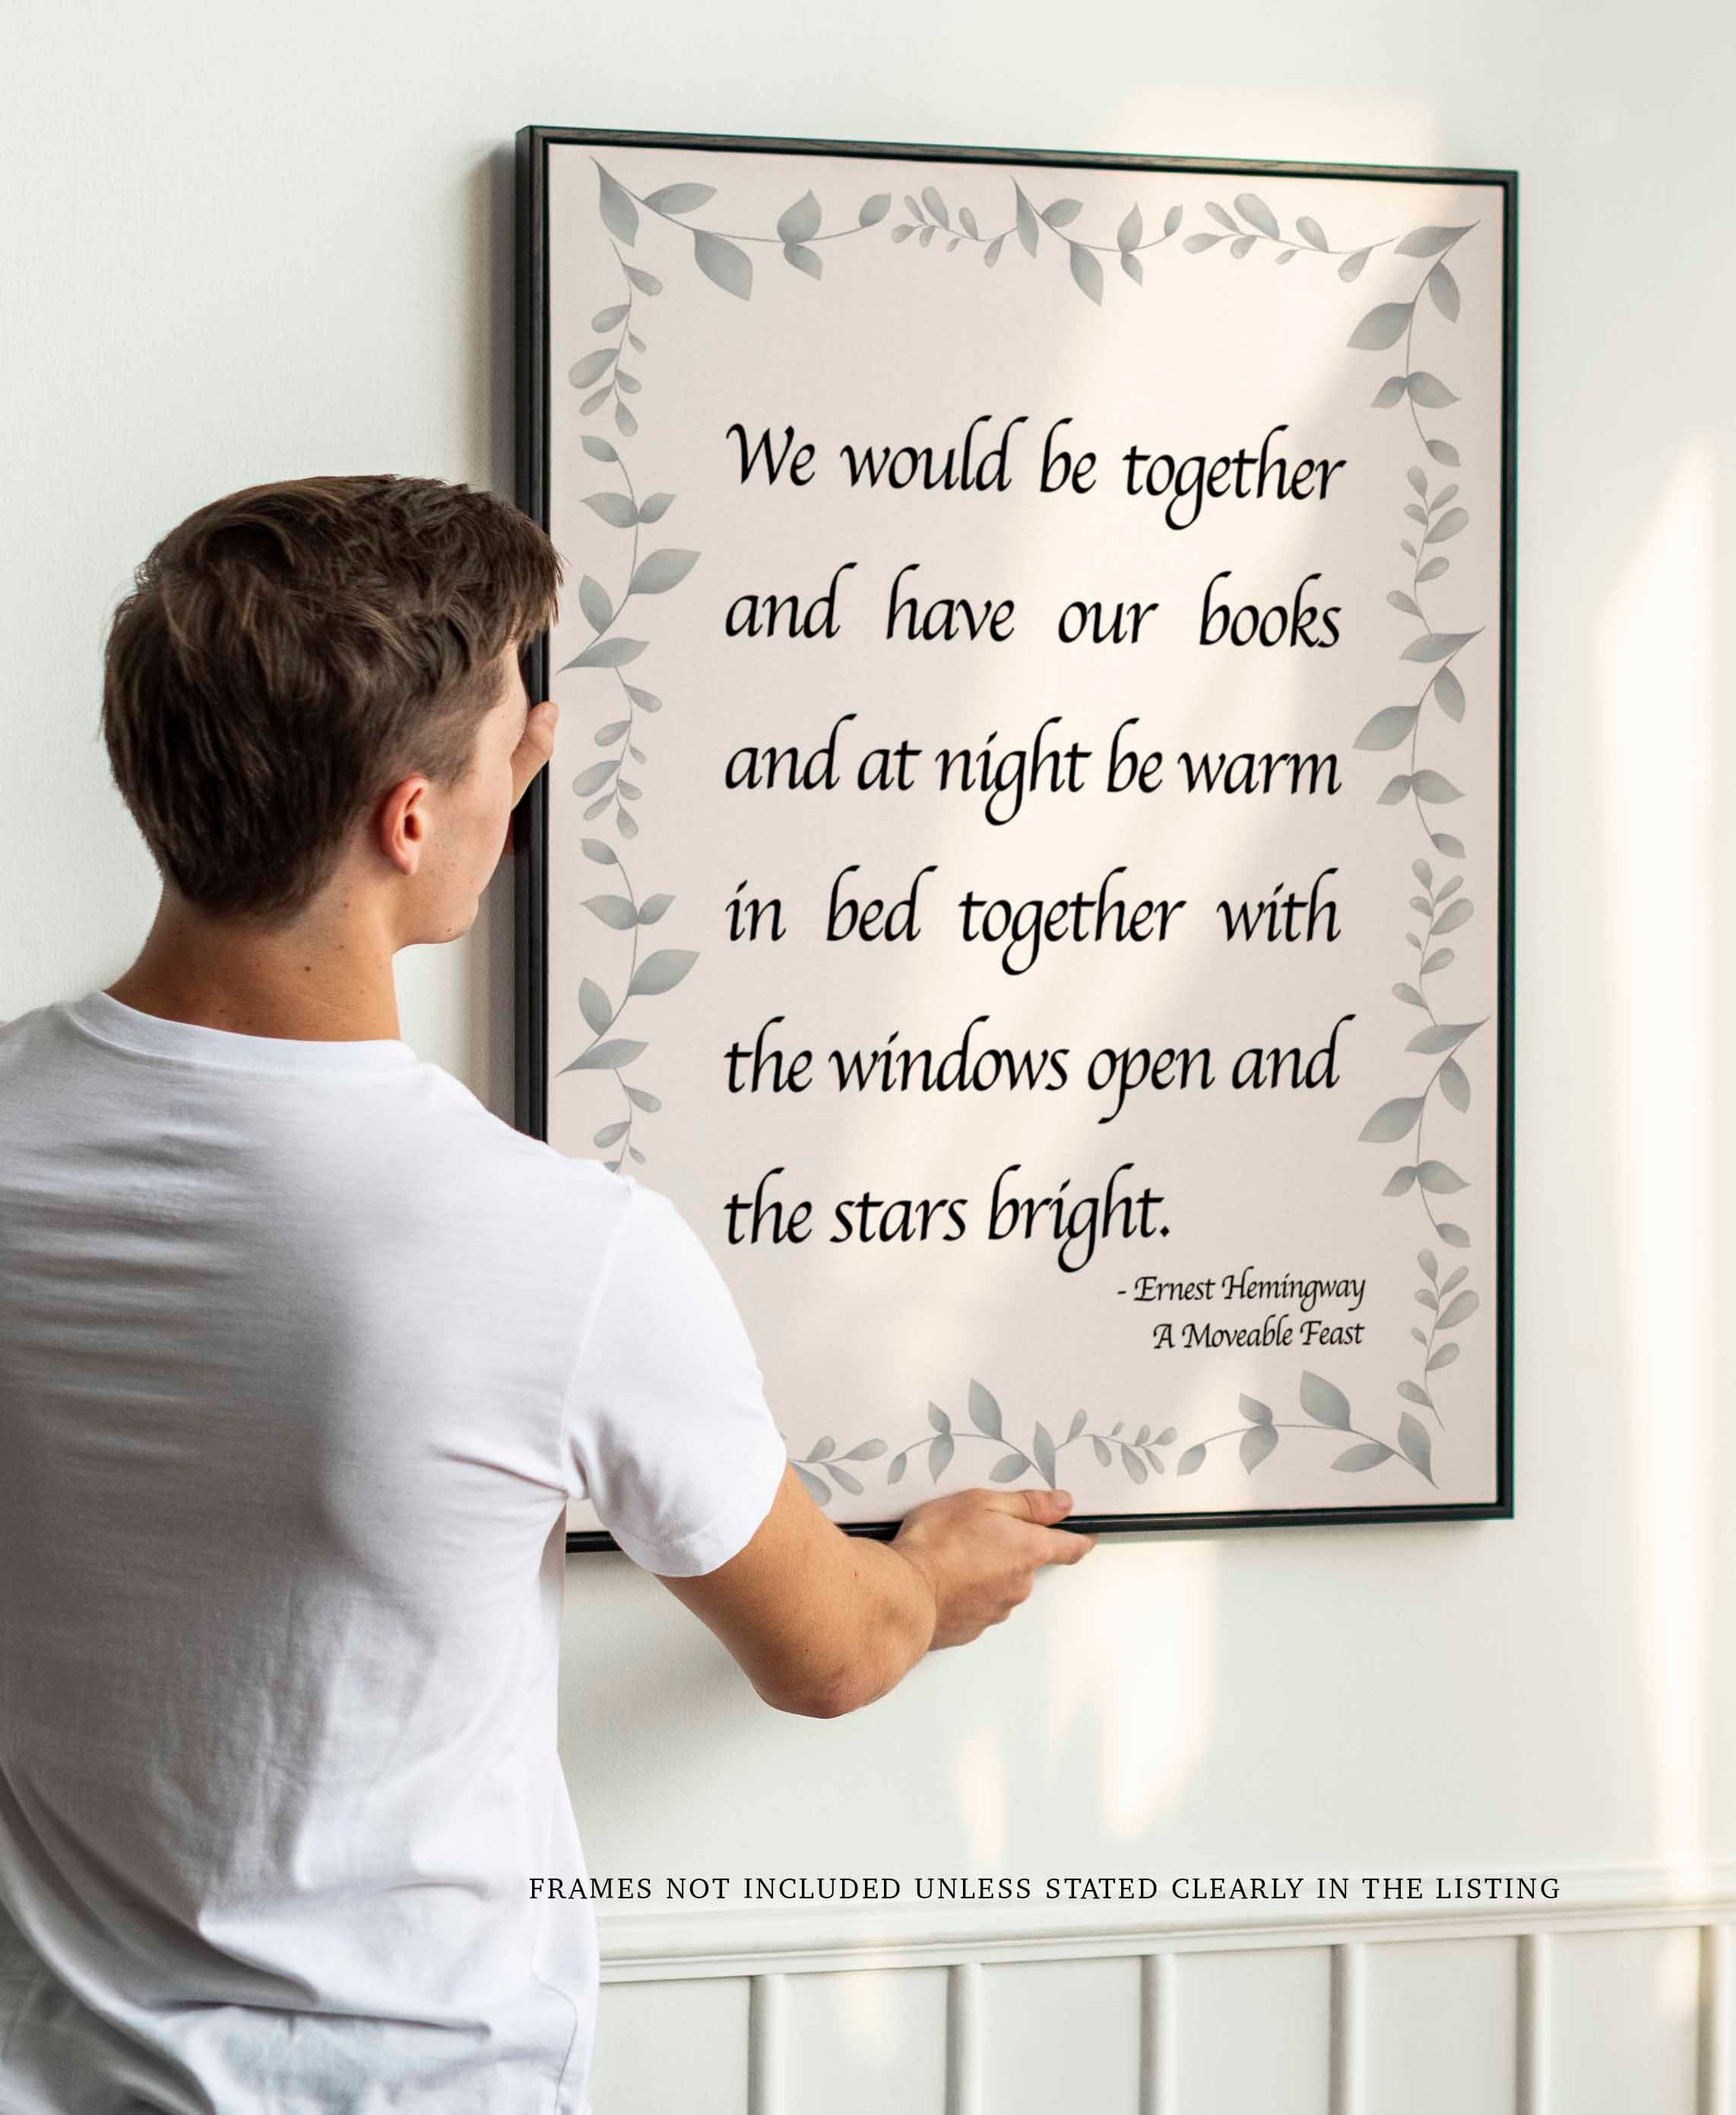 Ernest Hemingway Quote Print, We Would Be Together And Have Our Books - Romantic Art Print